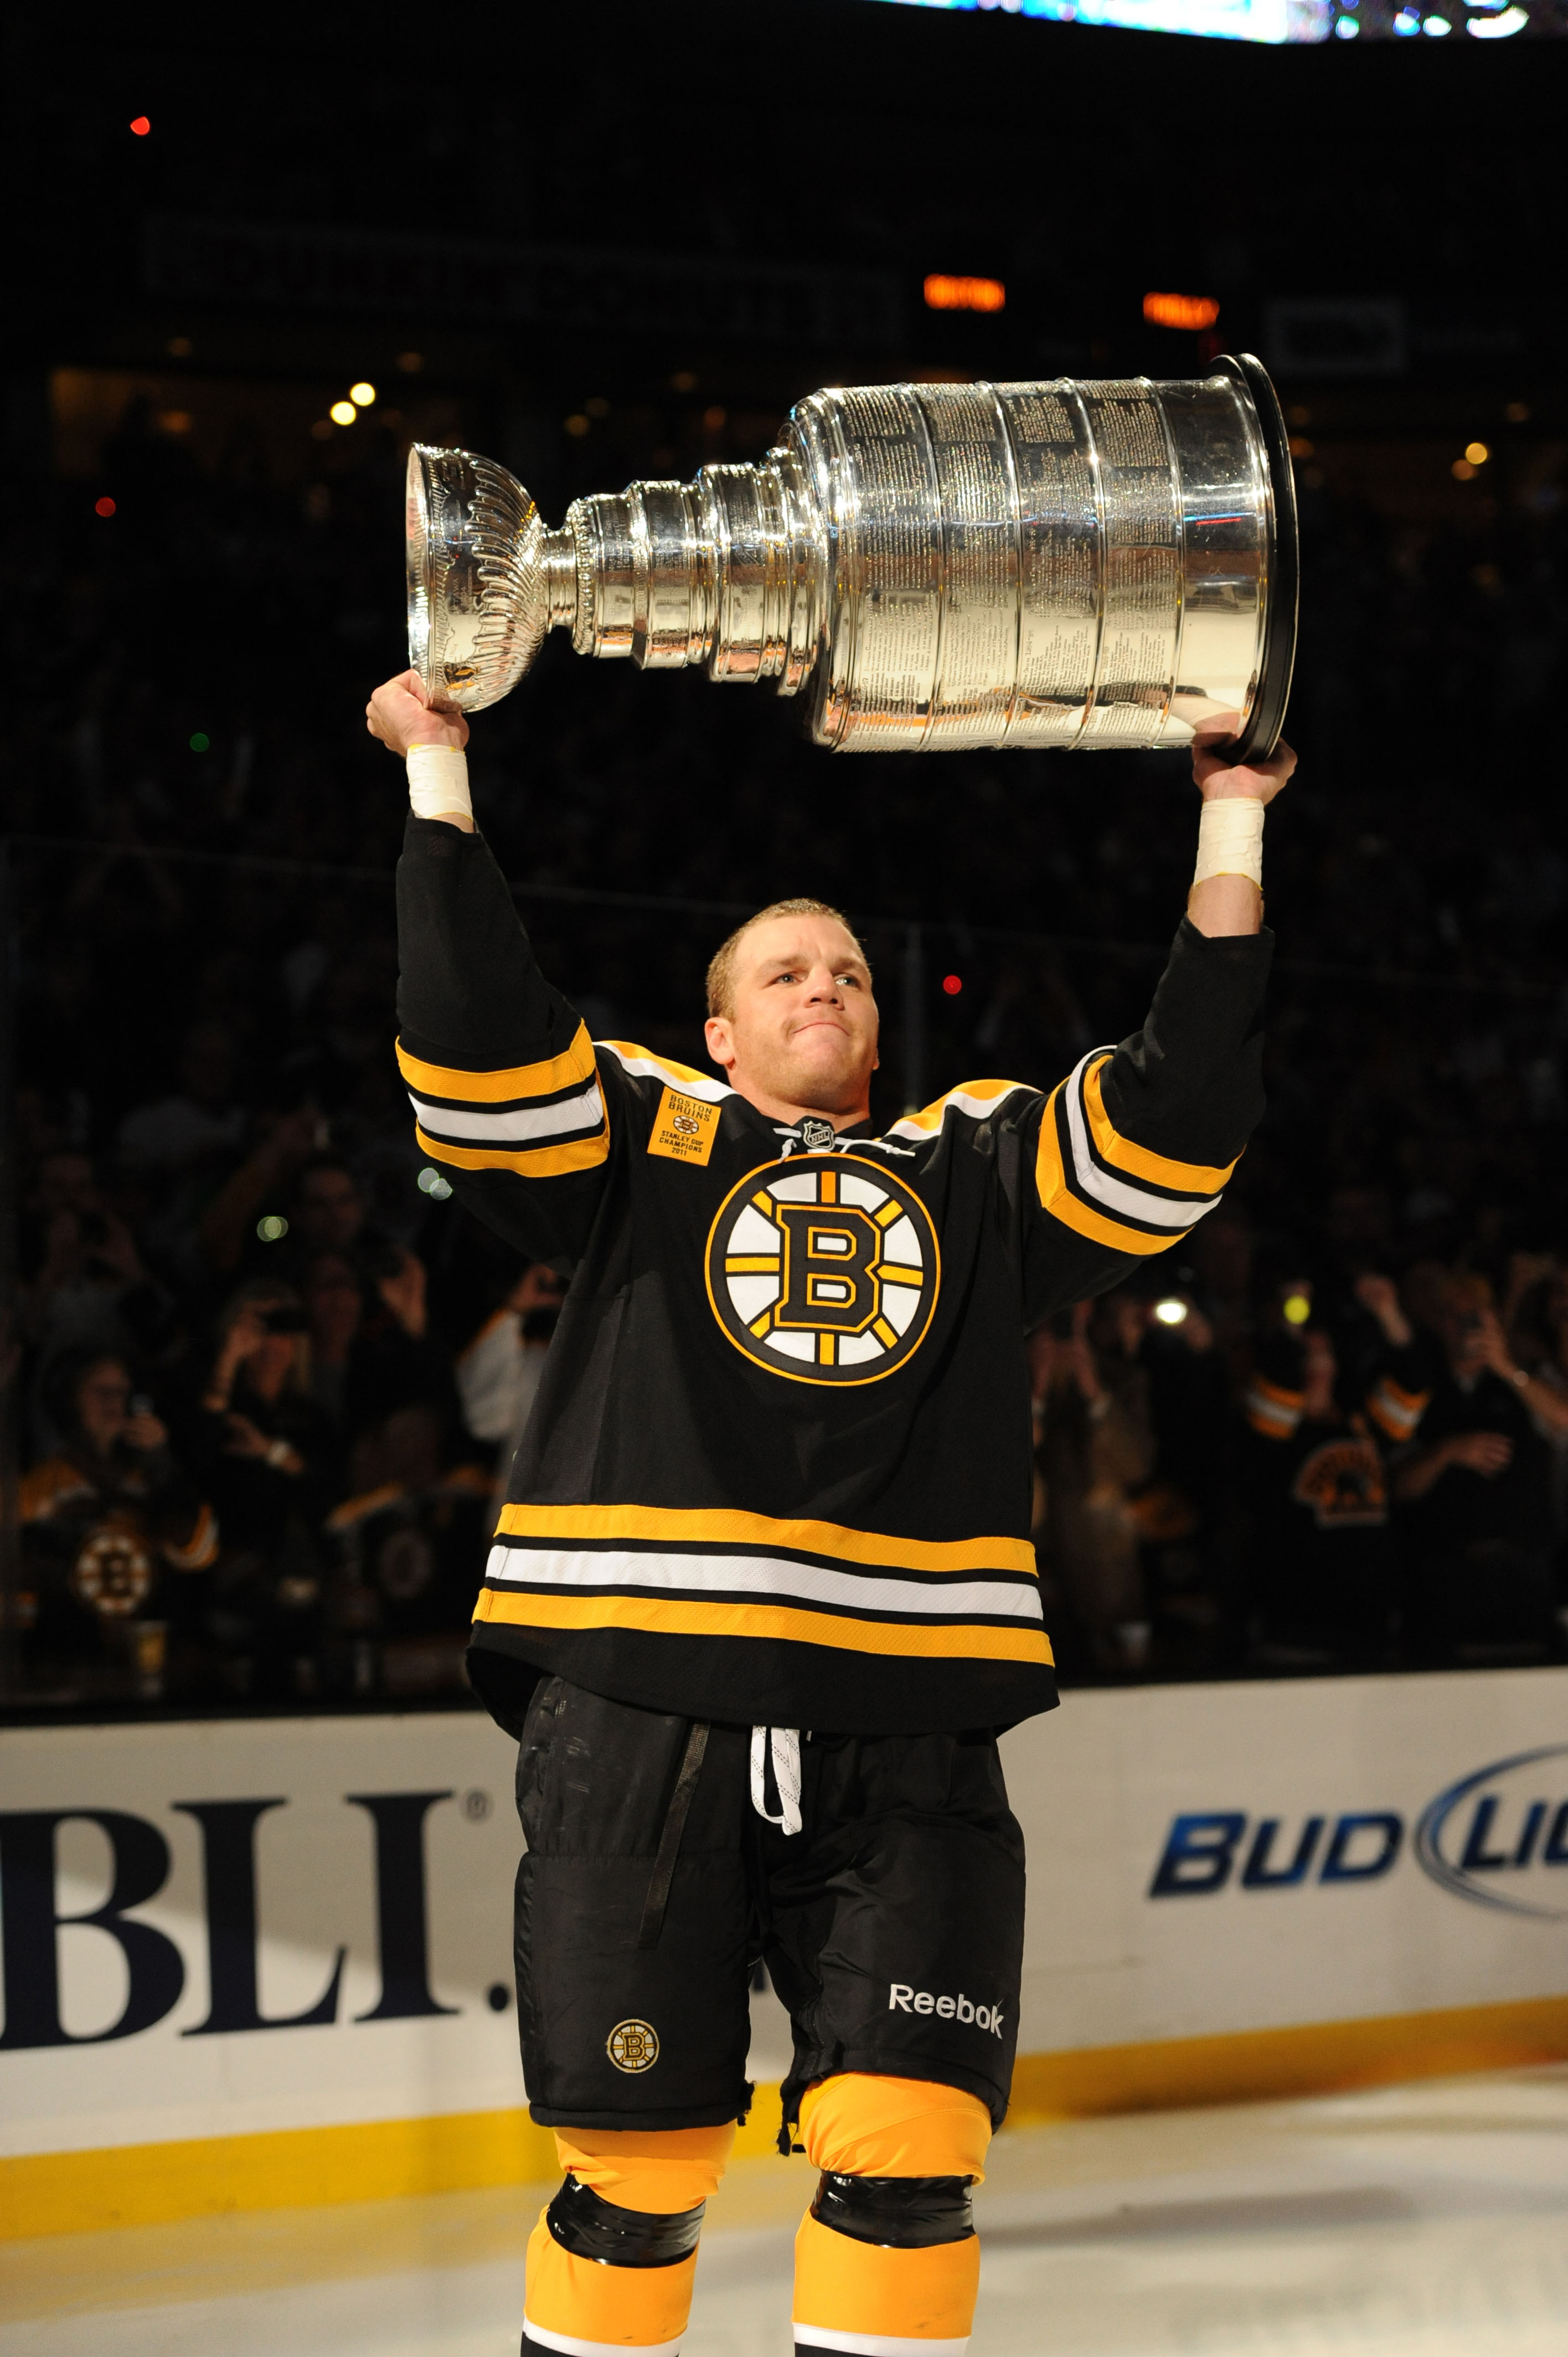 shawn thornton with the stanley cup